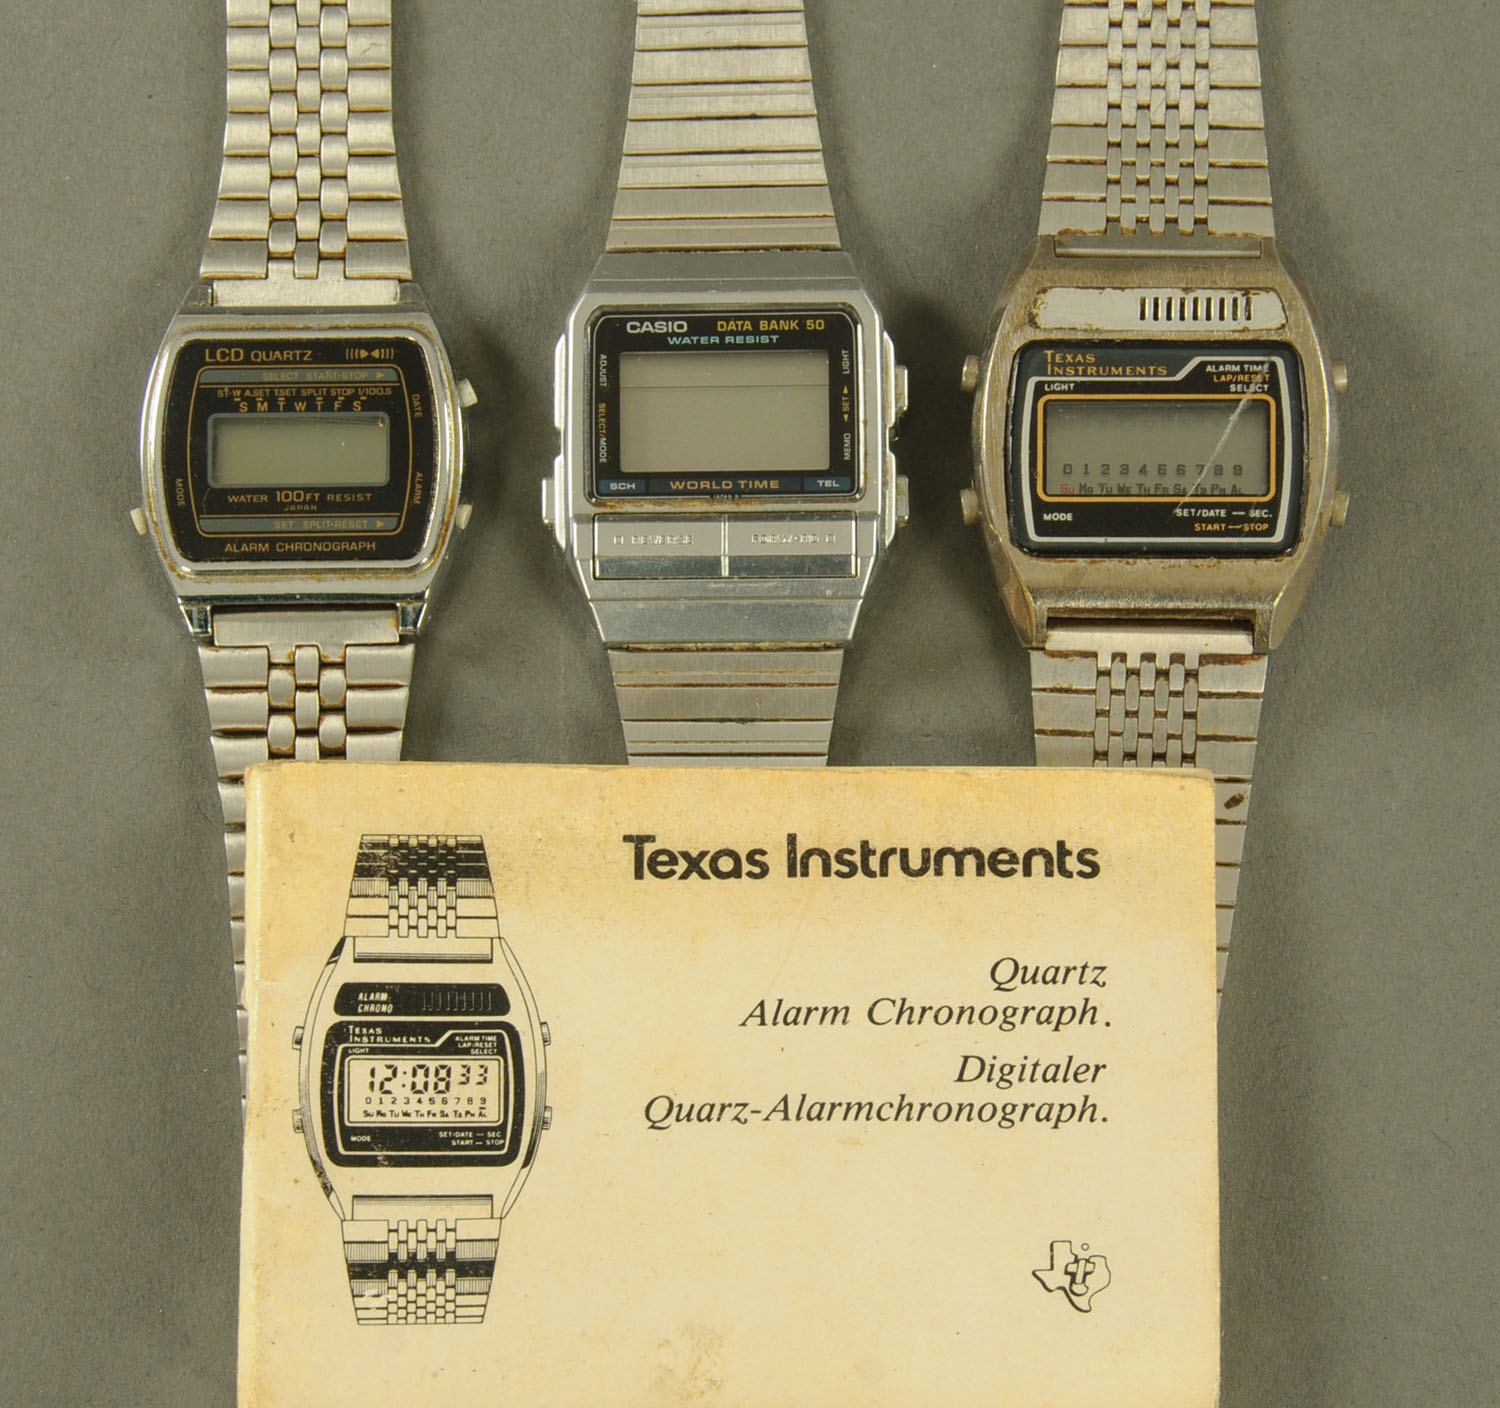 Three 1970's digital watches, Casio, Texas Instruments and another.